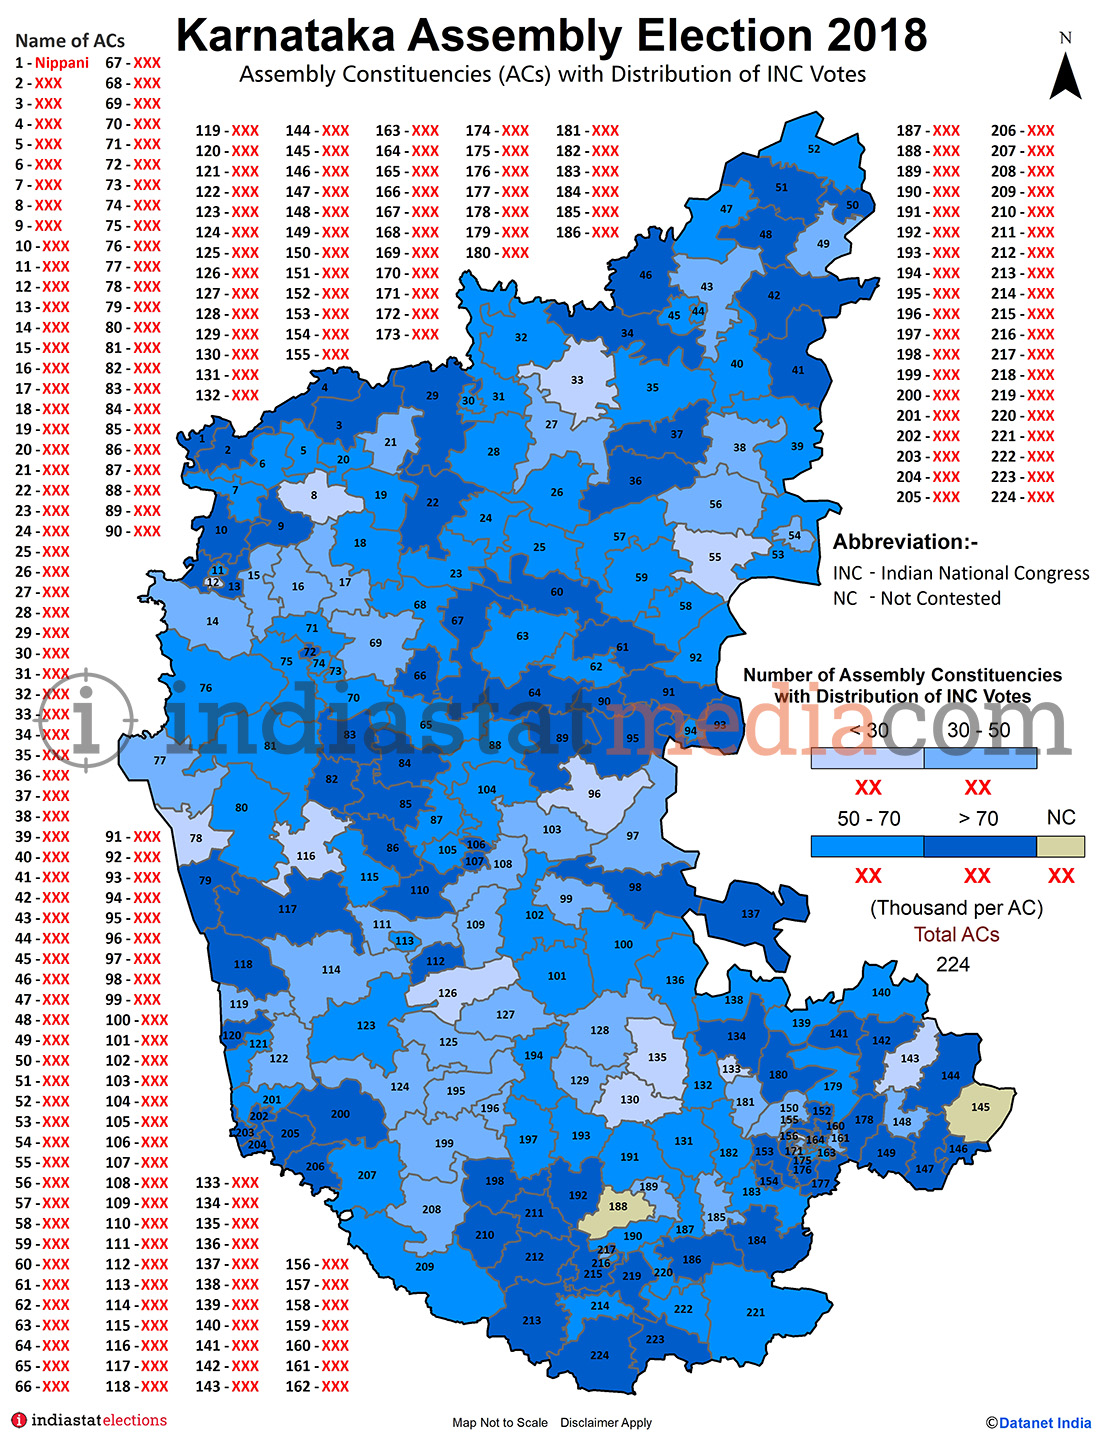 Distribution of INC Votes by Constituencies in Karnataka (Assembly Election - 2018)